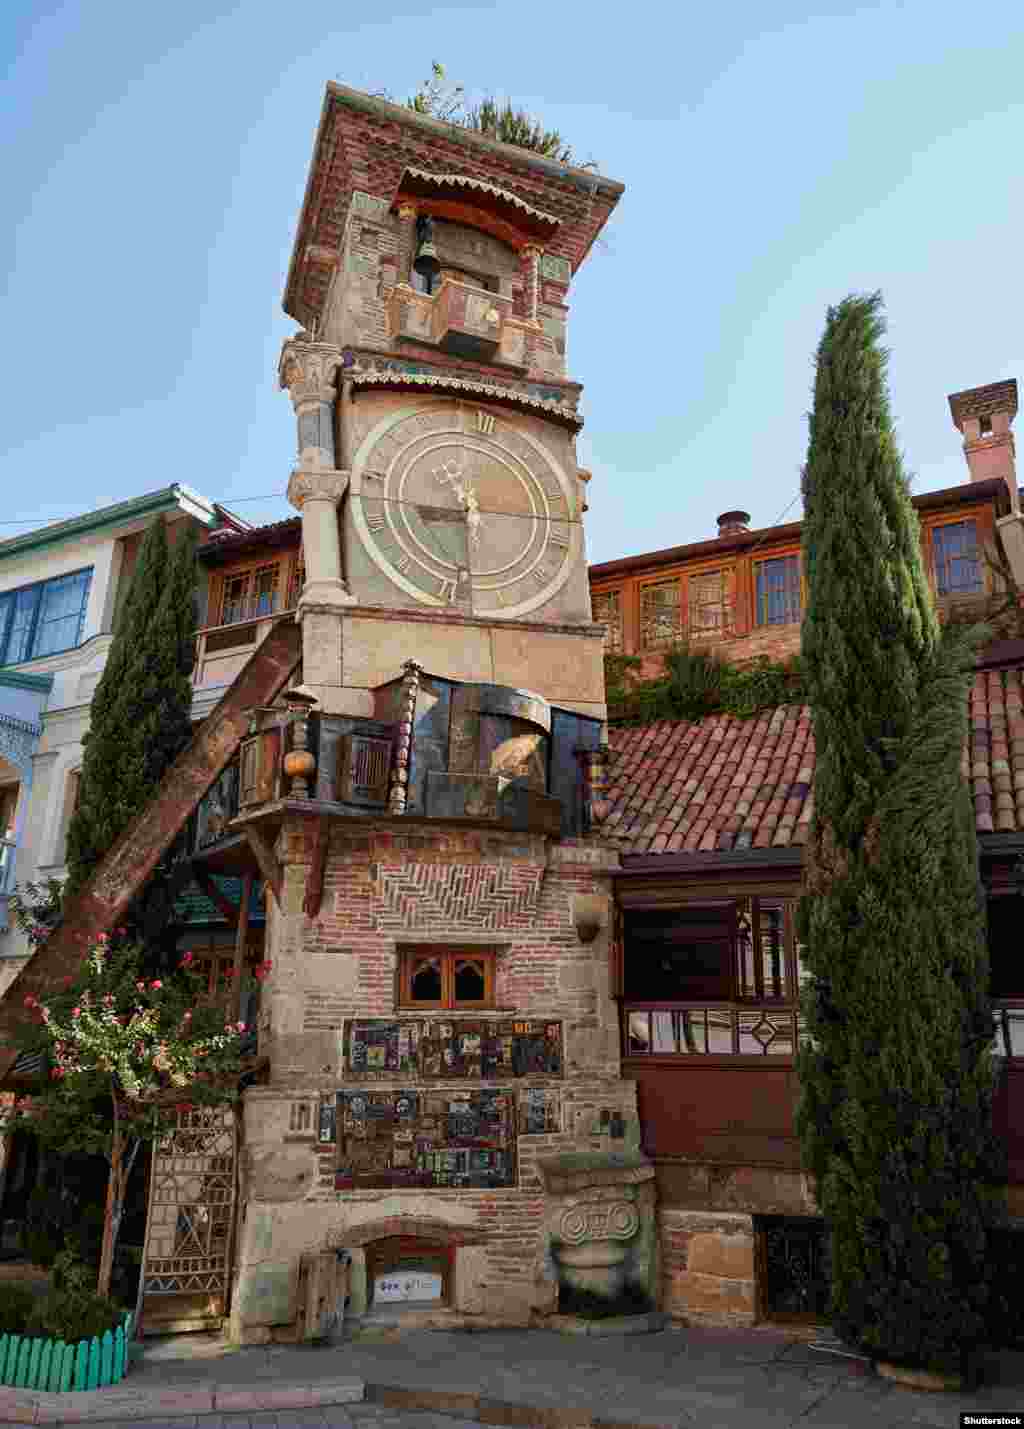 Gabriadze built the &ldquo;leaning tower of Tbilisi&rdquo; in front of his puppet theater in 2011. It soon became one of the Georgian capital&rsquo;s most popular sights. &nbsp;